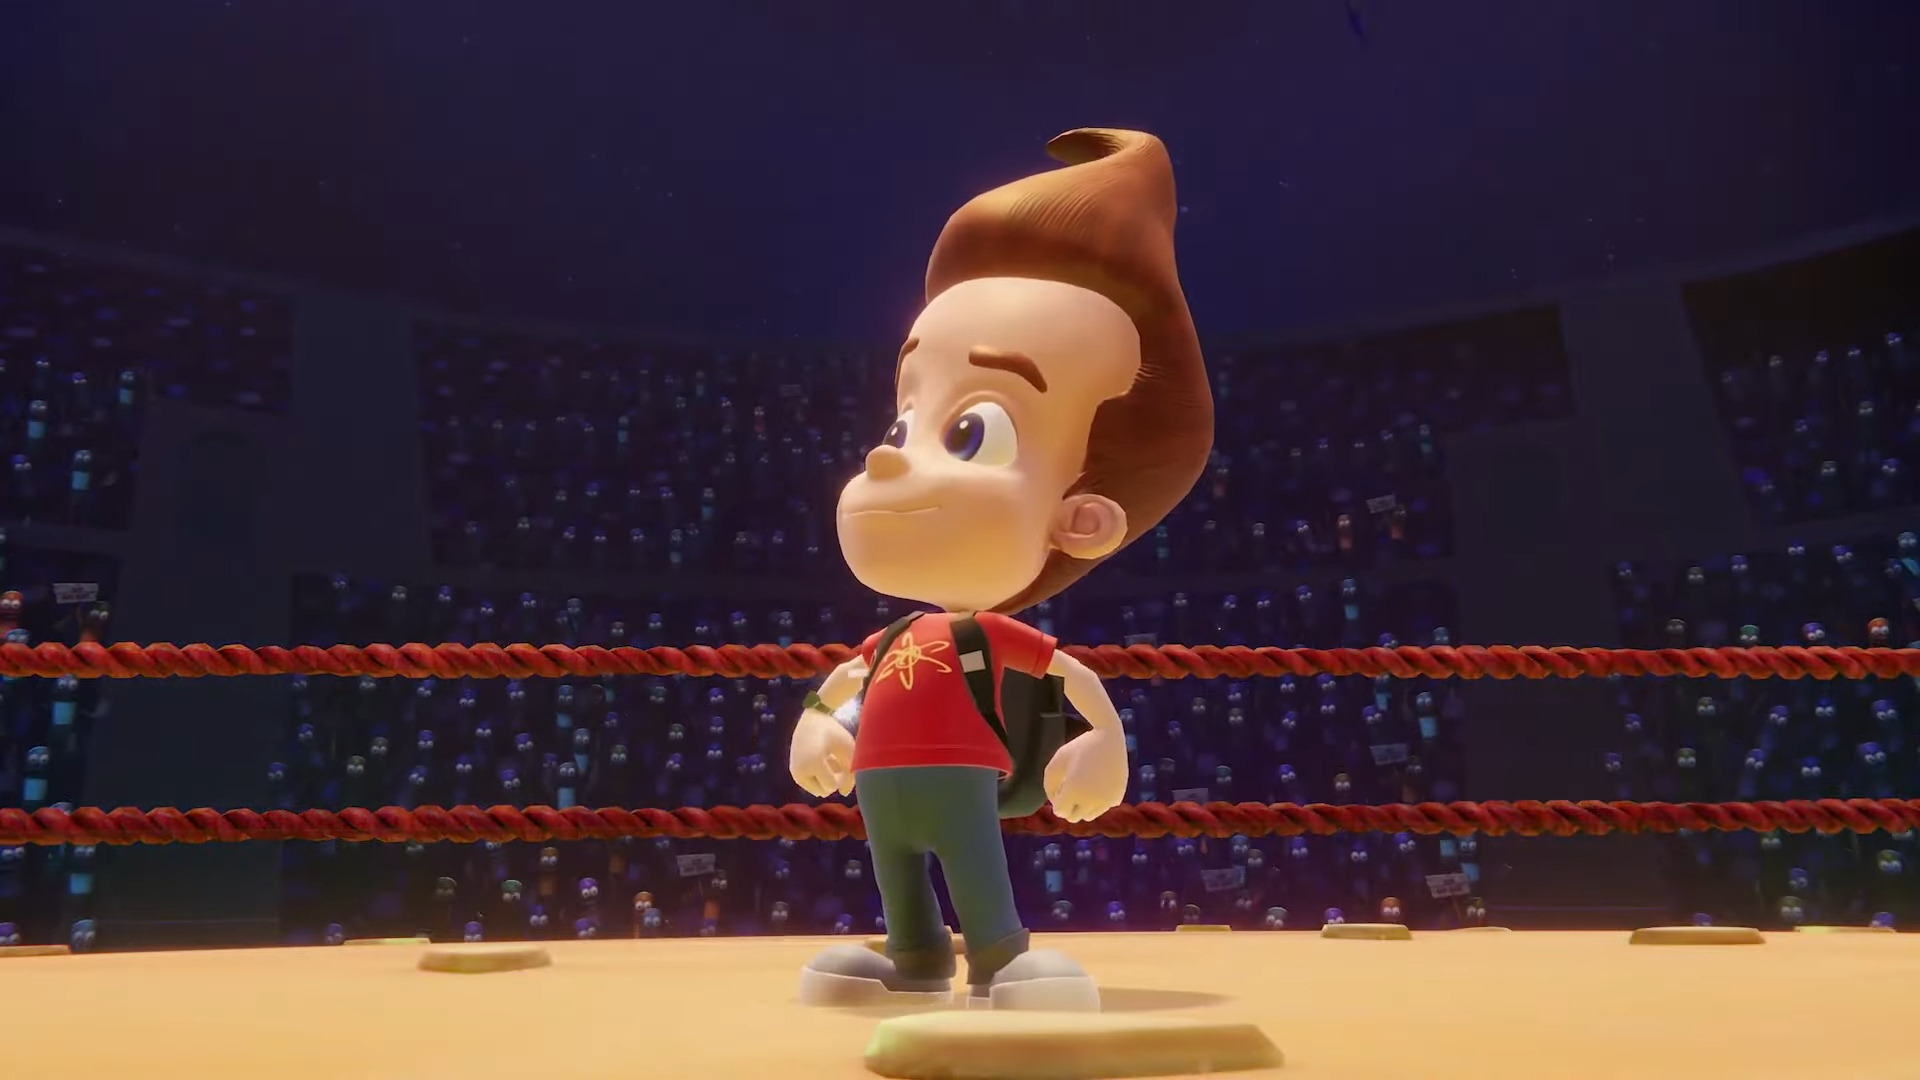 Jimmy Neutron in a boxing ring.